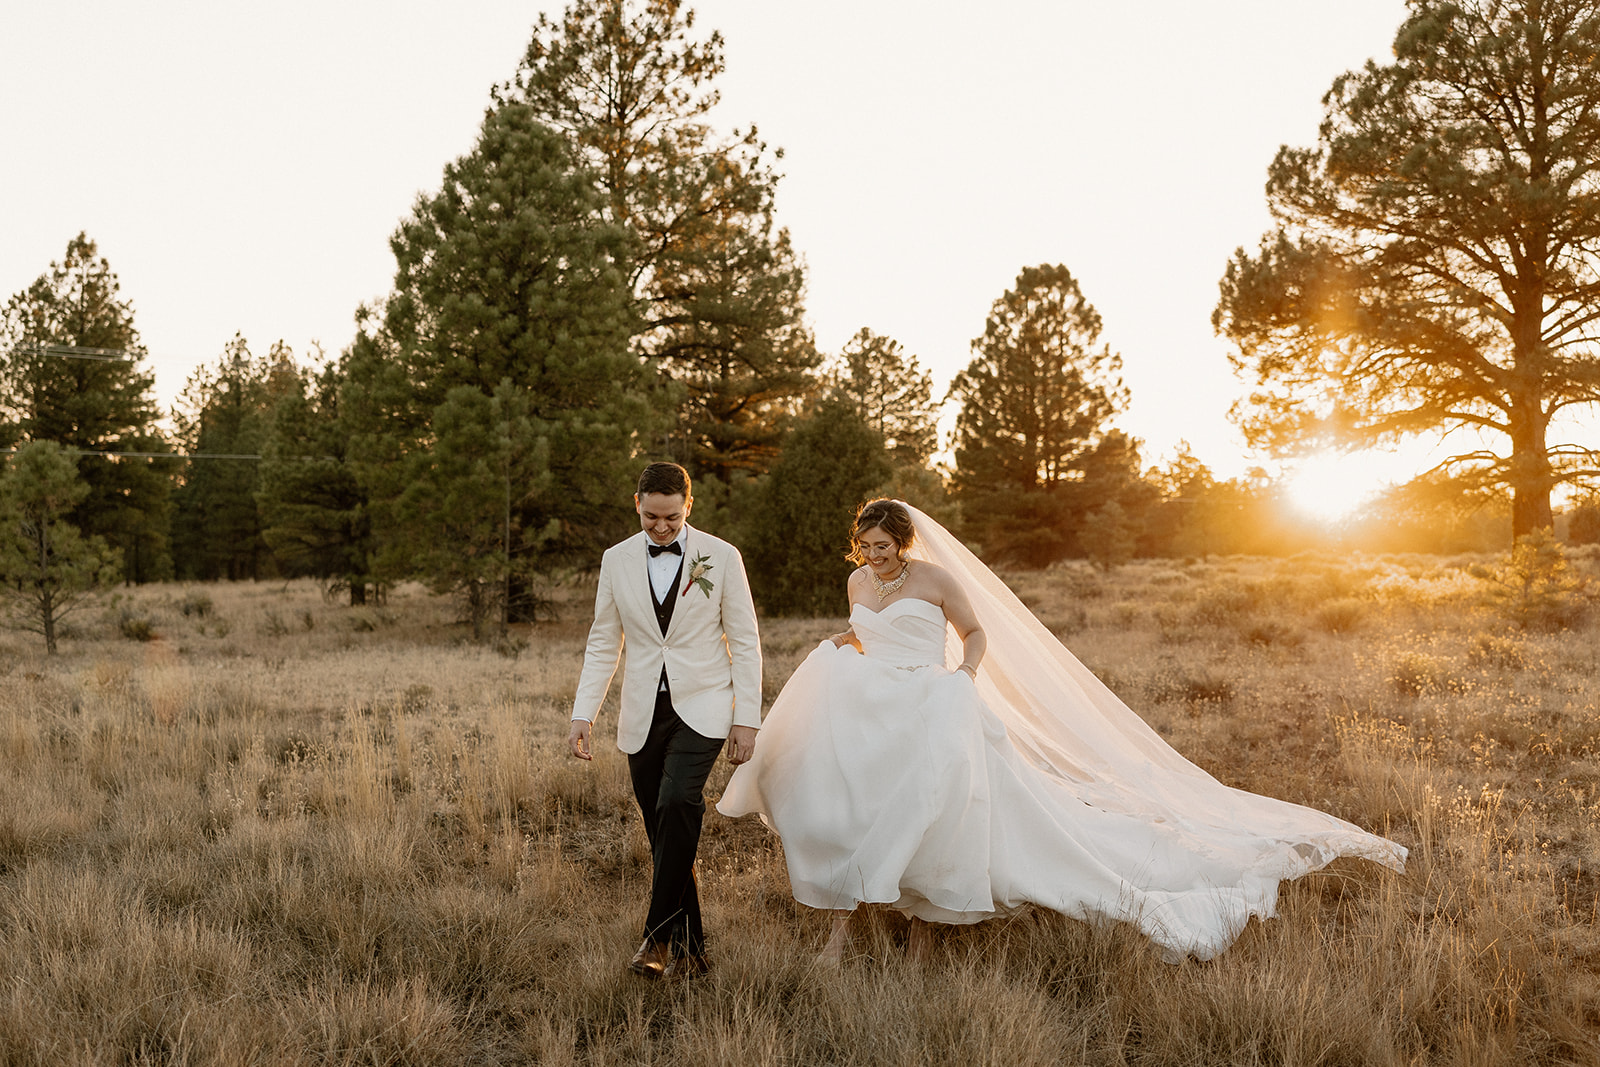 Stunning bride and groom pose together after their dreamy Flag Staff, Arizona wedding